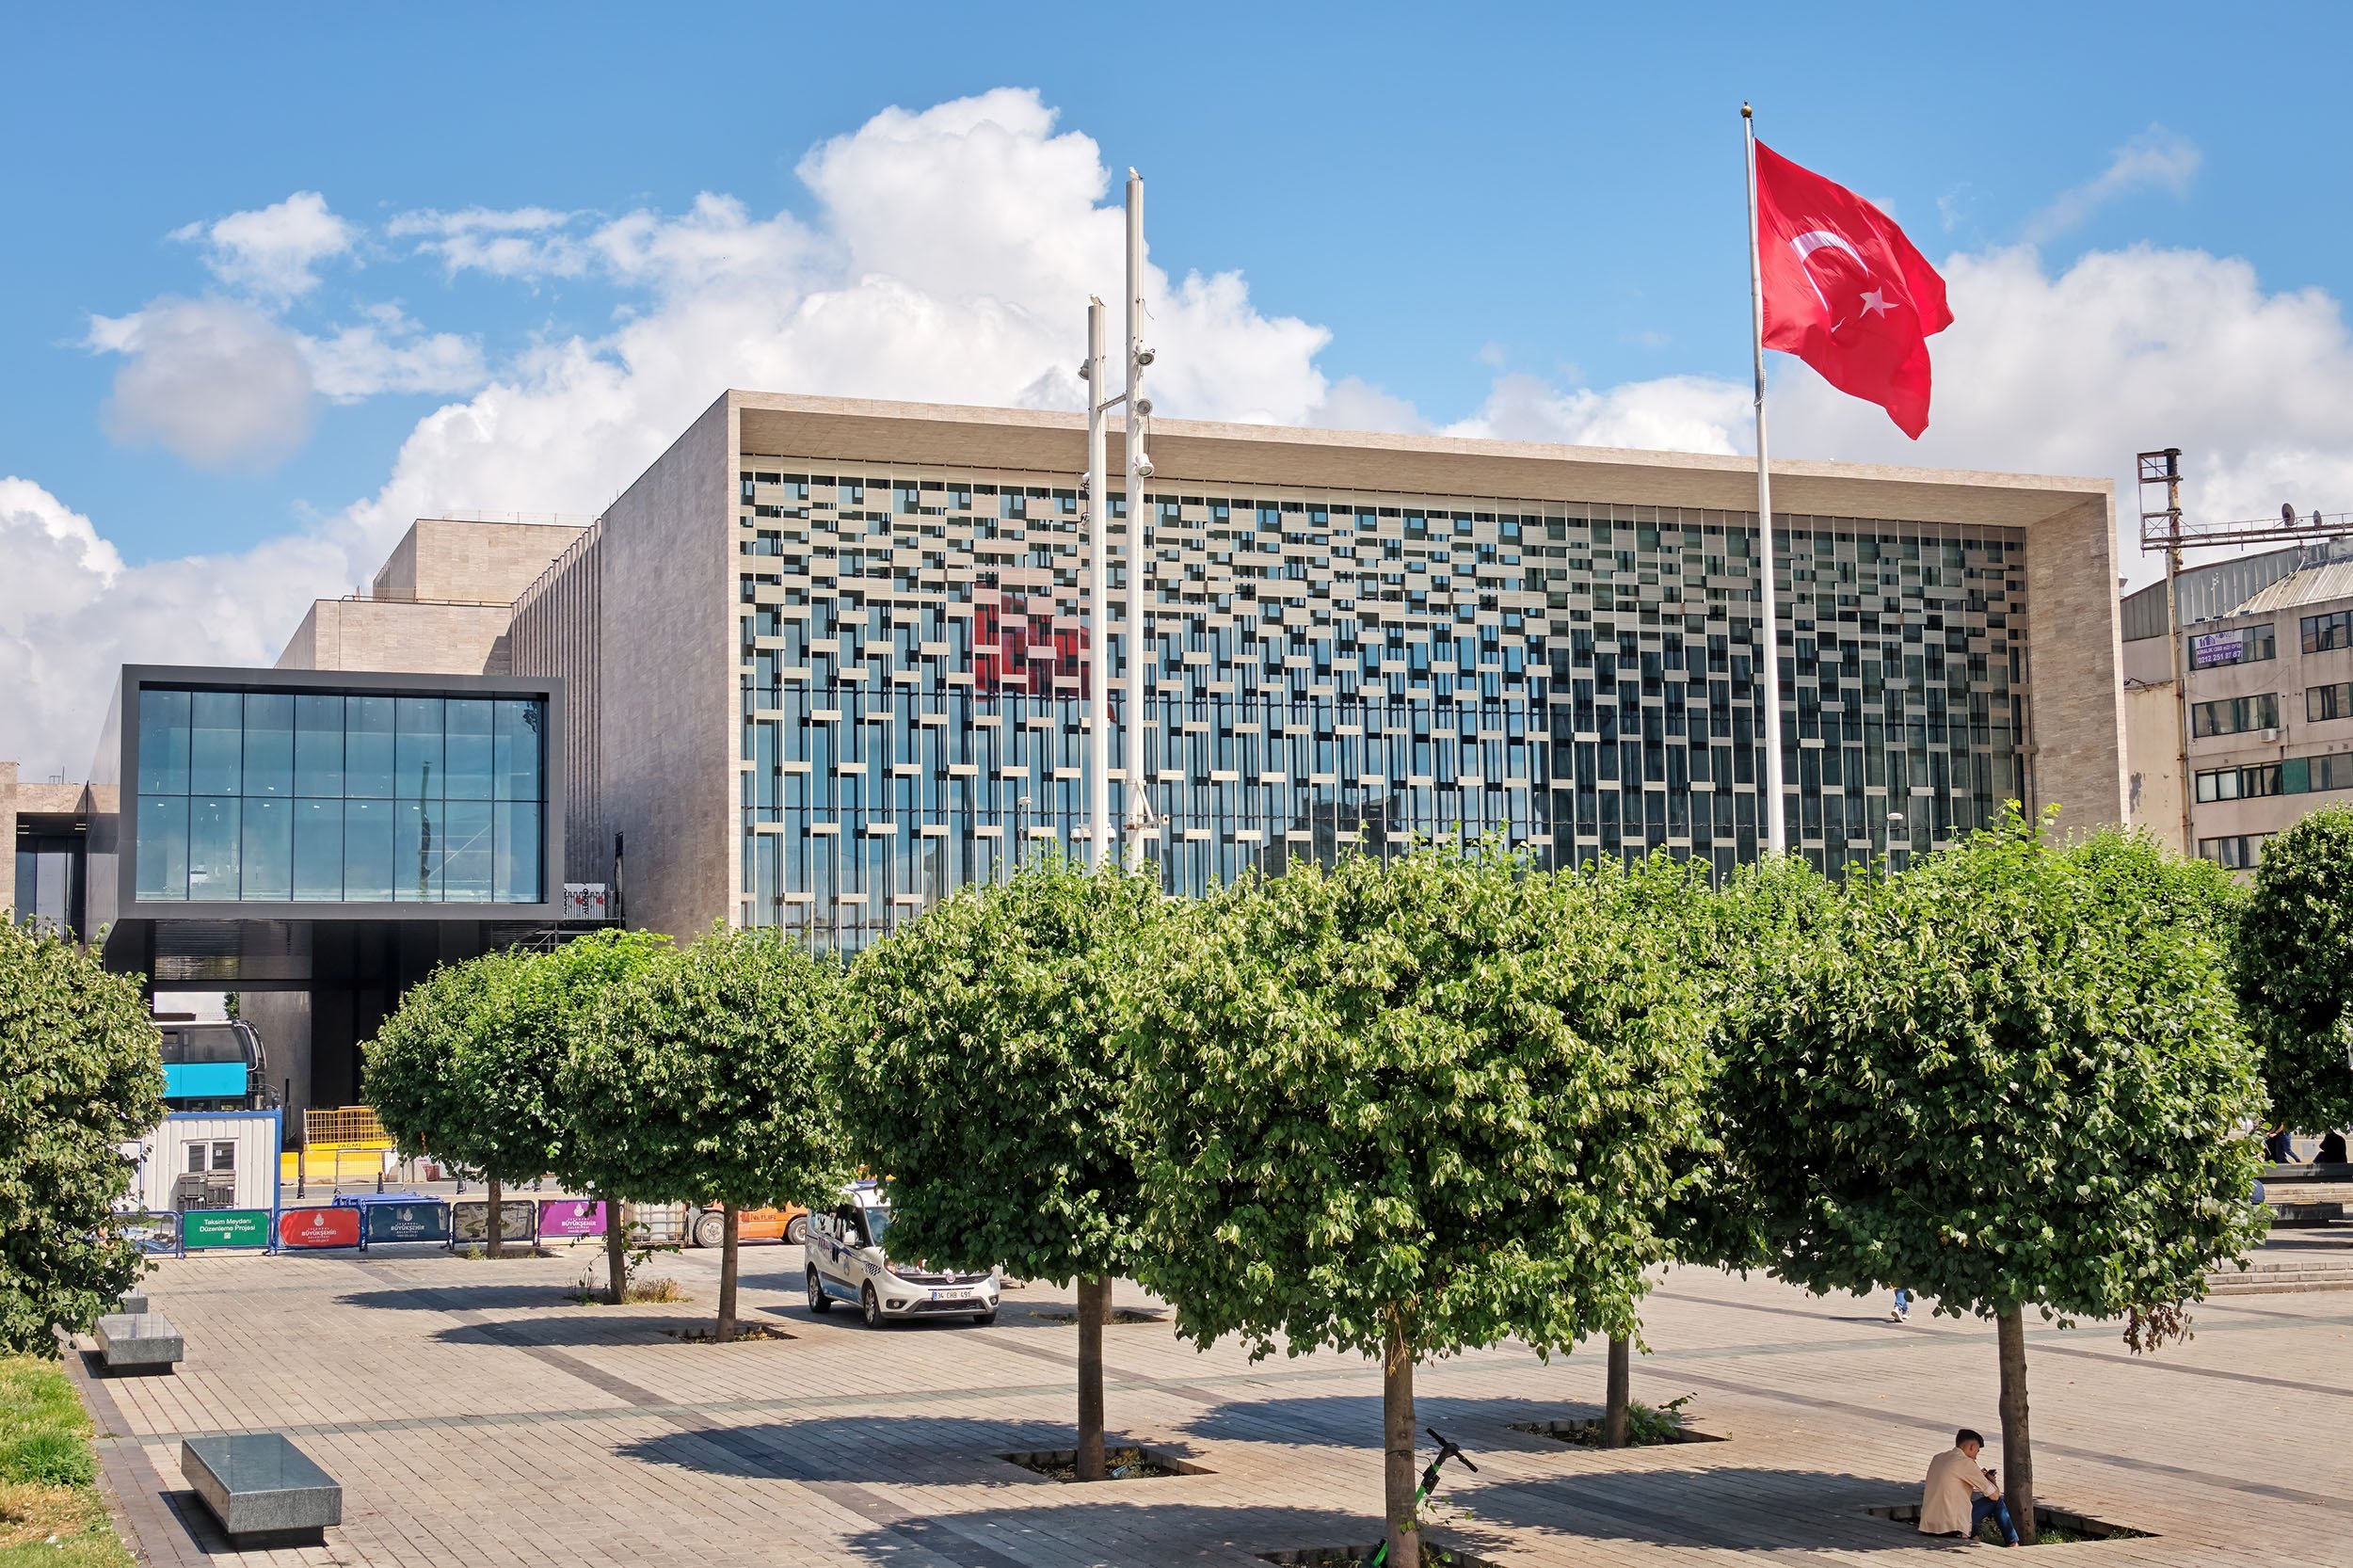 An exterior view from the Atatürk Cultural Center in Taksim, Istanbul, Turkey, July 8, 2021. (Shutterstock Photo) 